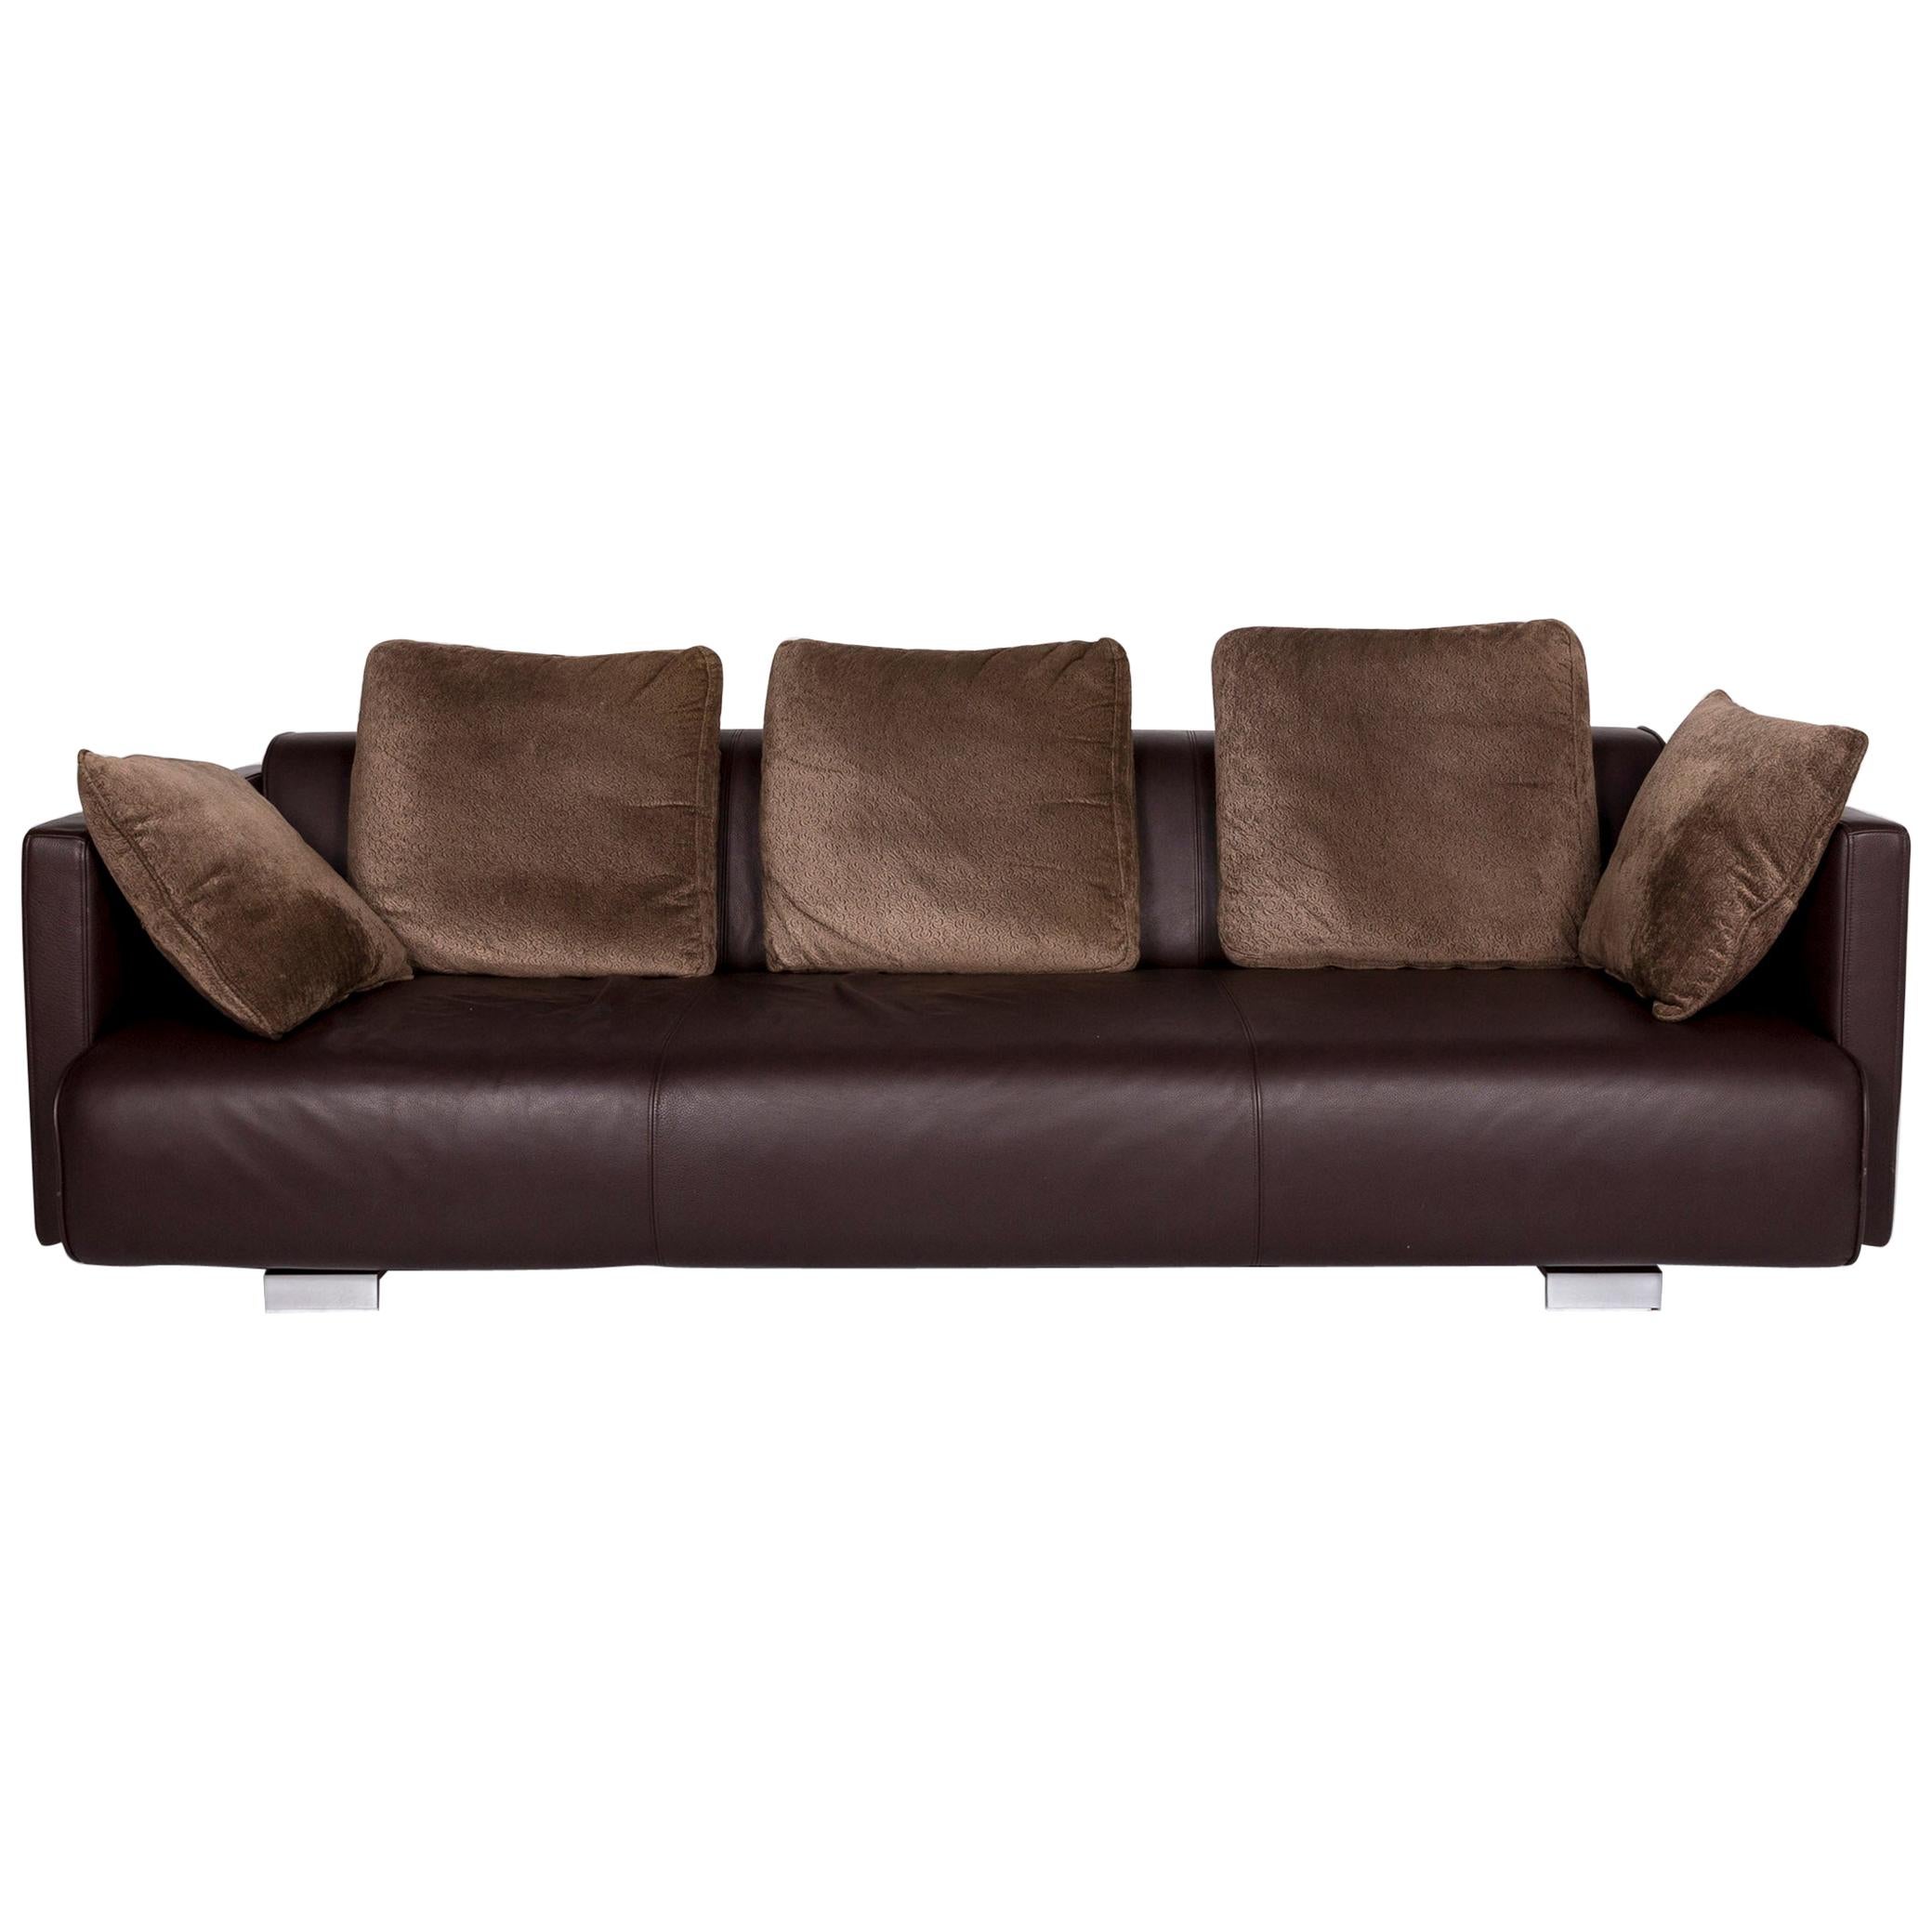 Rolf Benz 6300 Leather Sofa Brown Dark Brown Incl. Cushion Three-Seat Couch For Sale